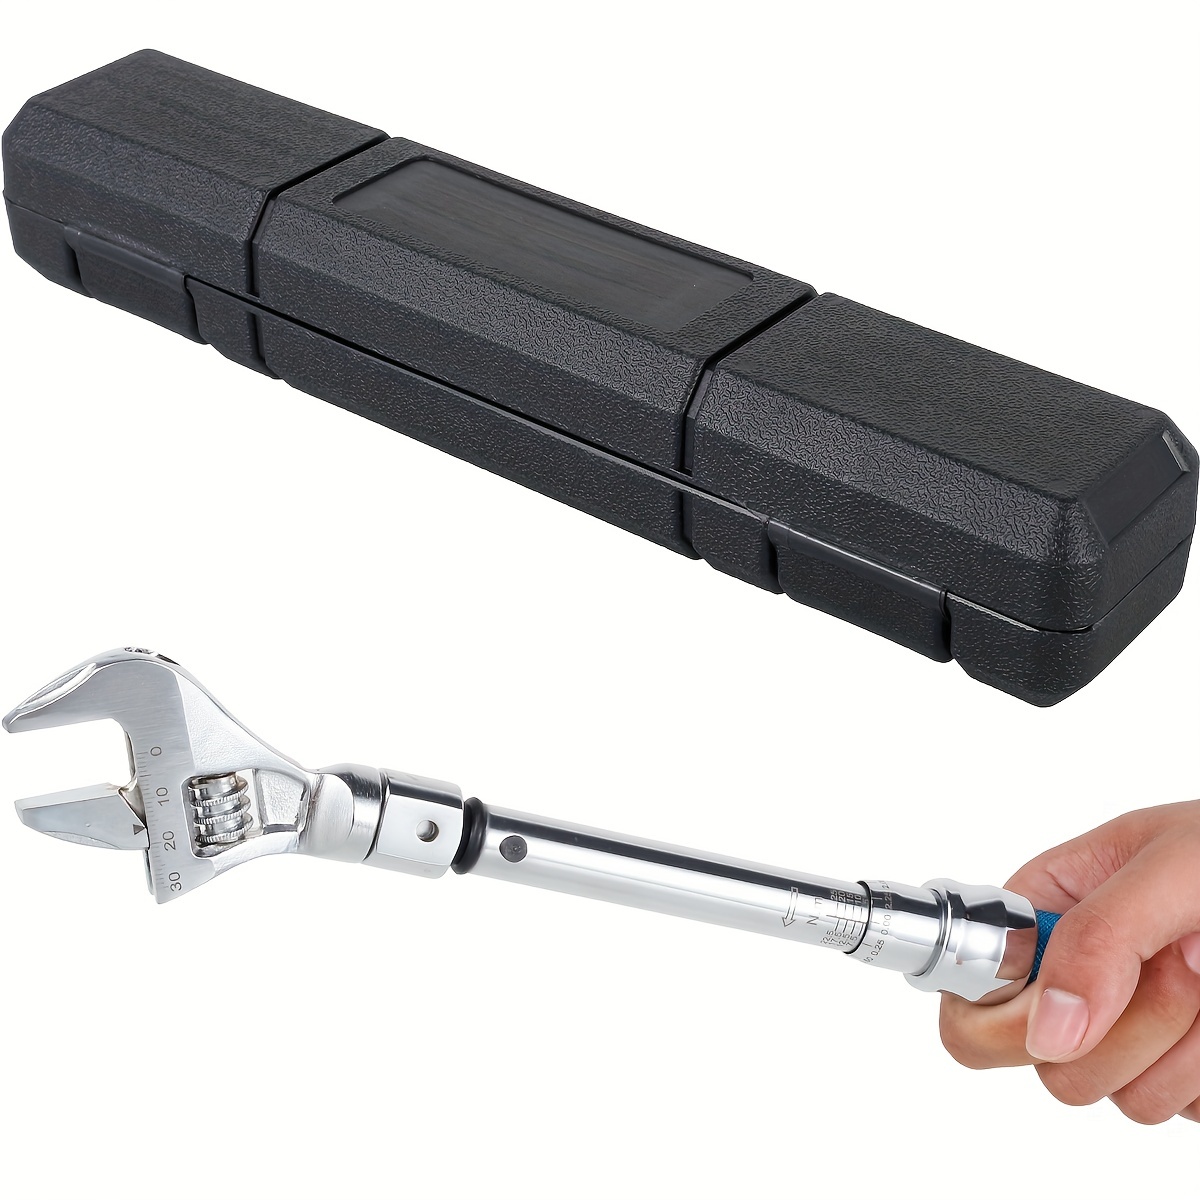 COTOUXKER Open End Adjustable Torque Wrench, 5 to 60 Nm Open End